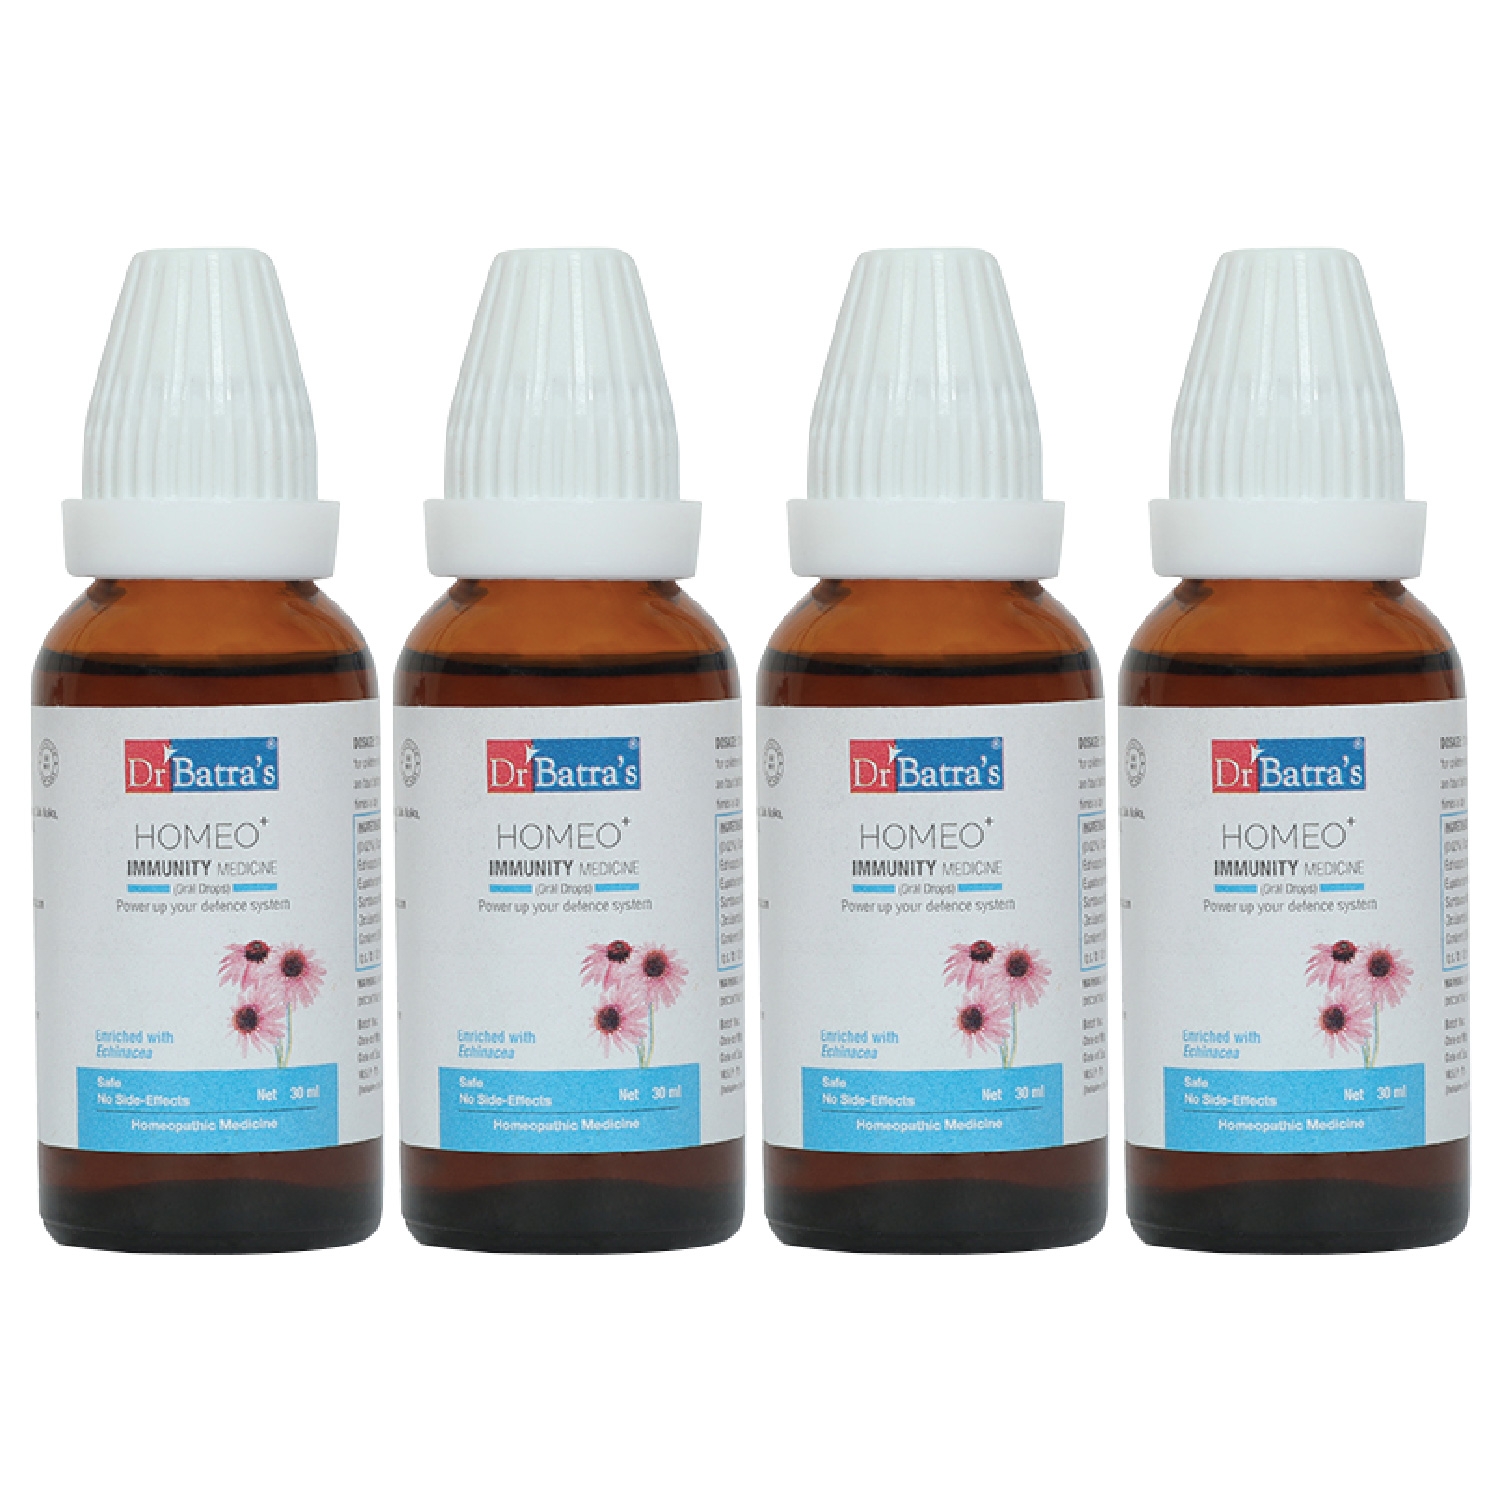 Dr Batra's | Dr Batra's Homeo+ Immunity Medicine Oral Drops|Scientific & Natural |Stay Home, Stay Safe - 30 ml (Family Pack of 4)